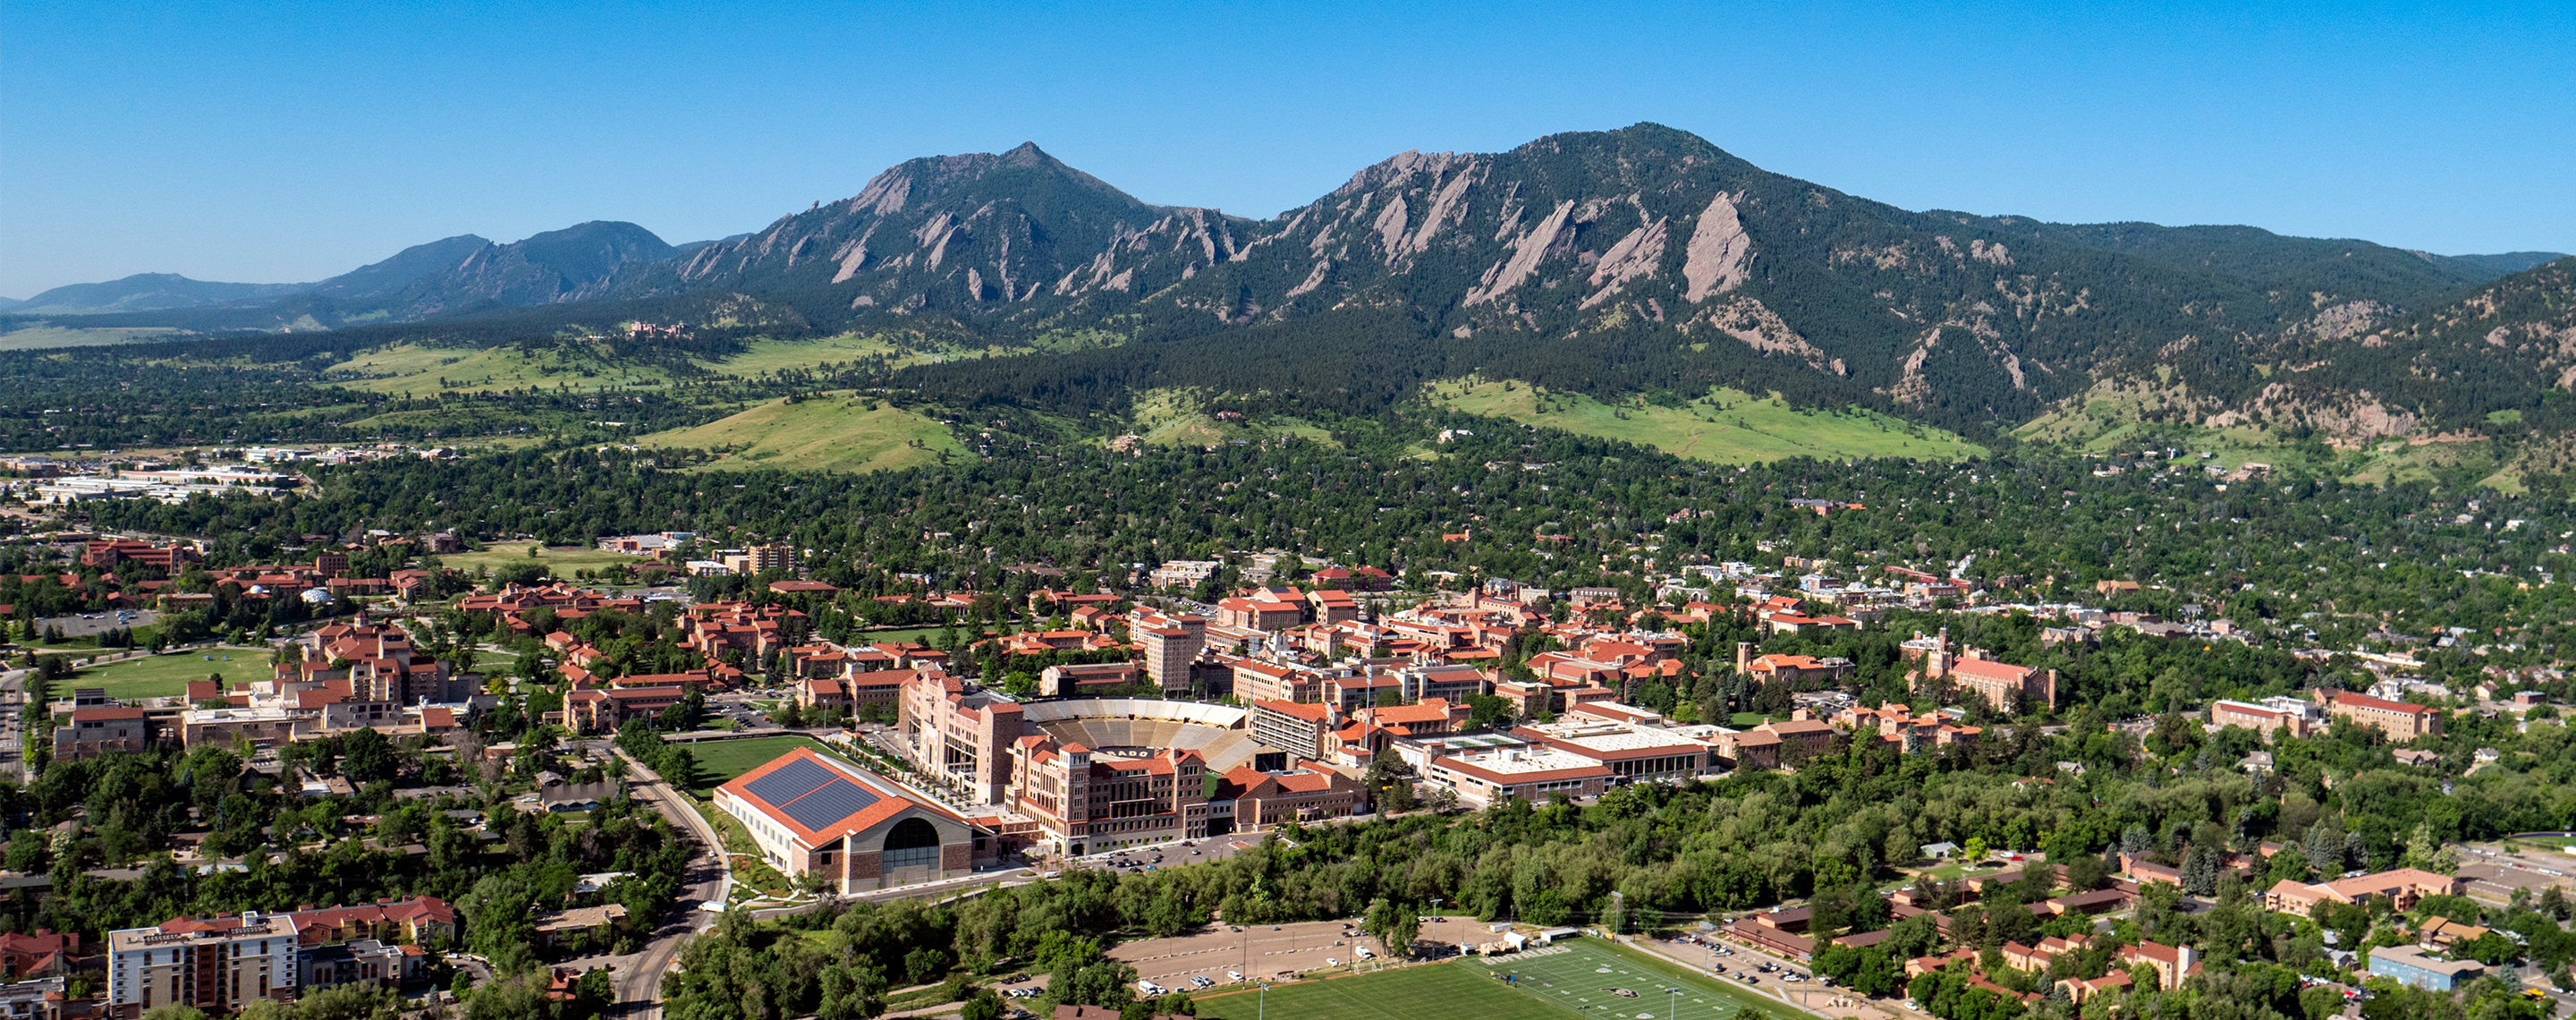 Cu Boulder Fall 2022 Calendar Igs Workshop Igs 2022: Science From Earth To Space - International  Association Of Geodesy